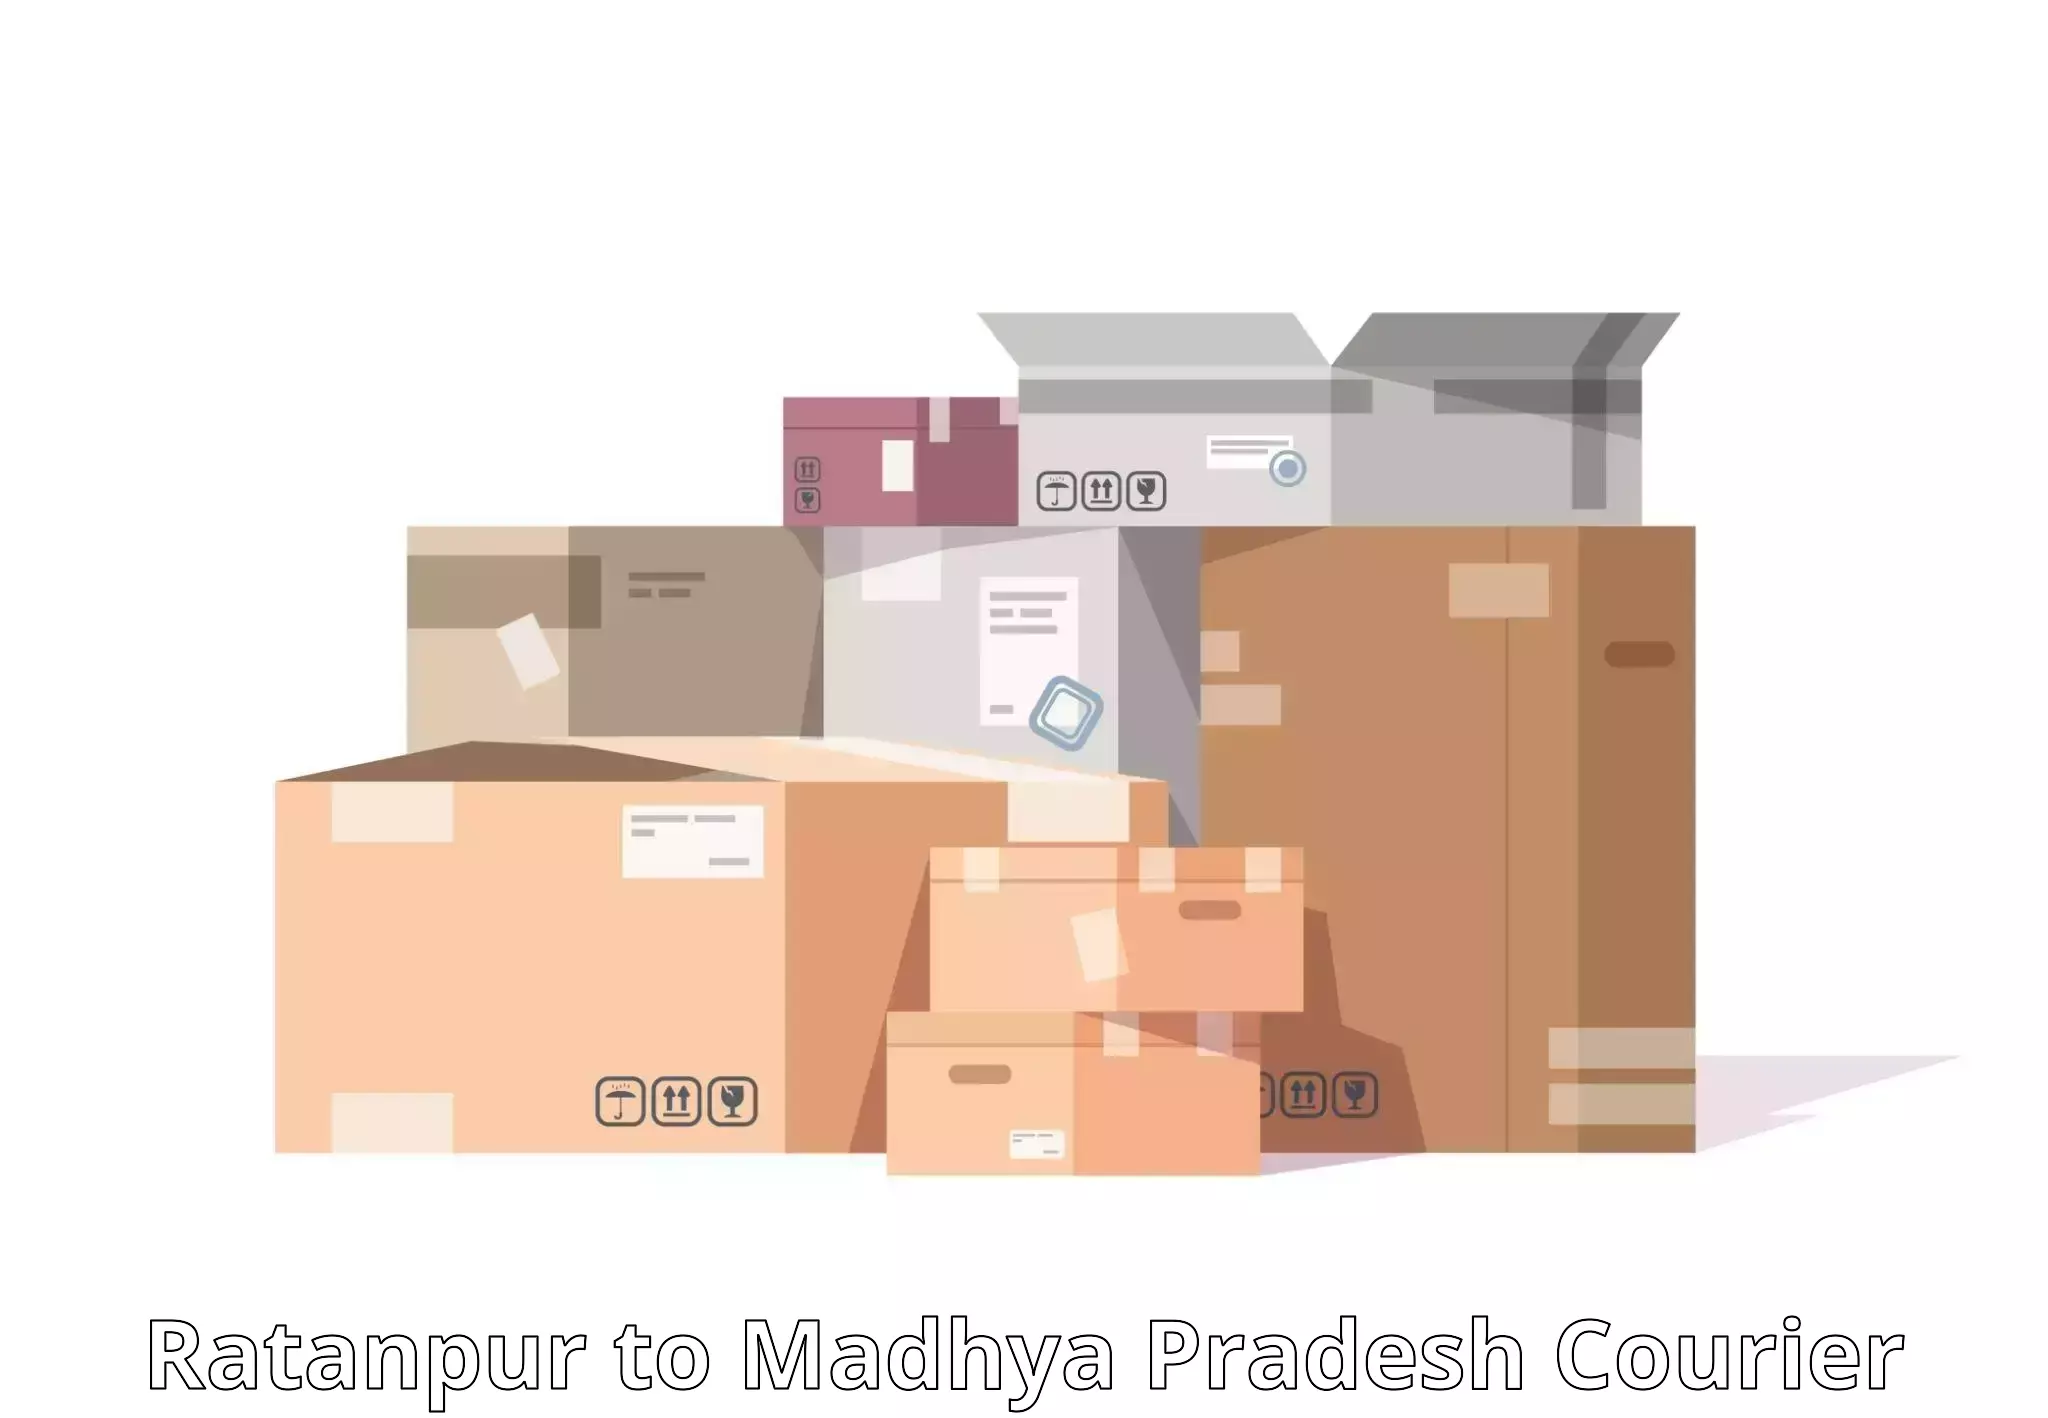 Courier rate comparison in Ratanpur to Datia